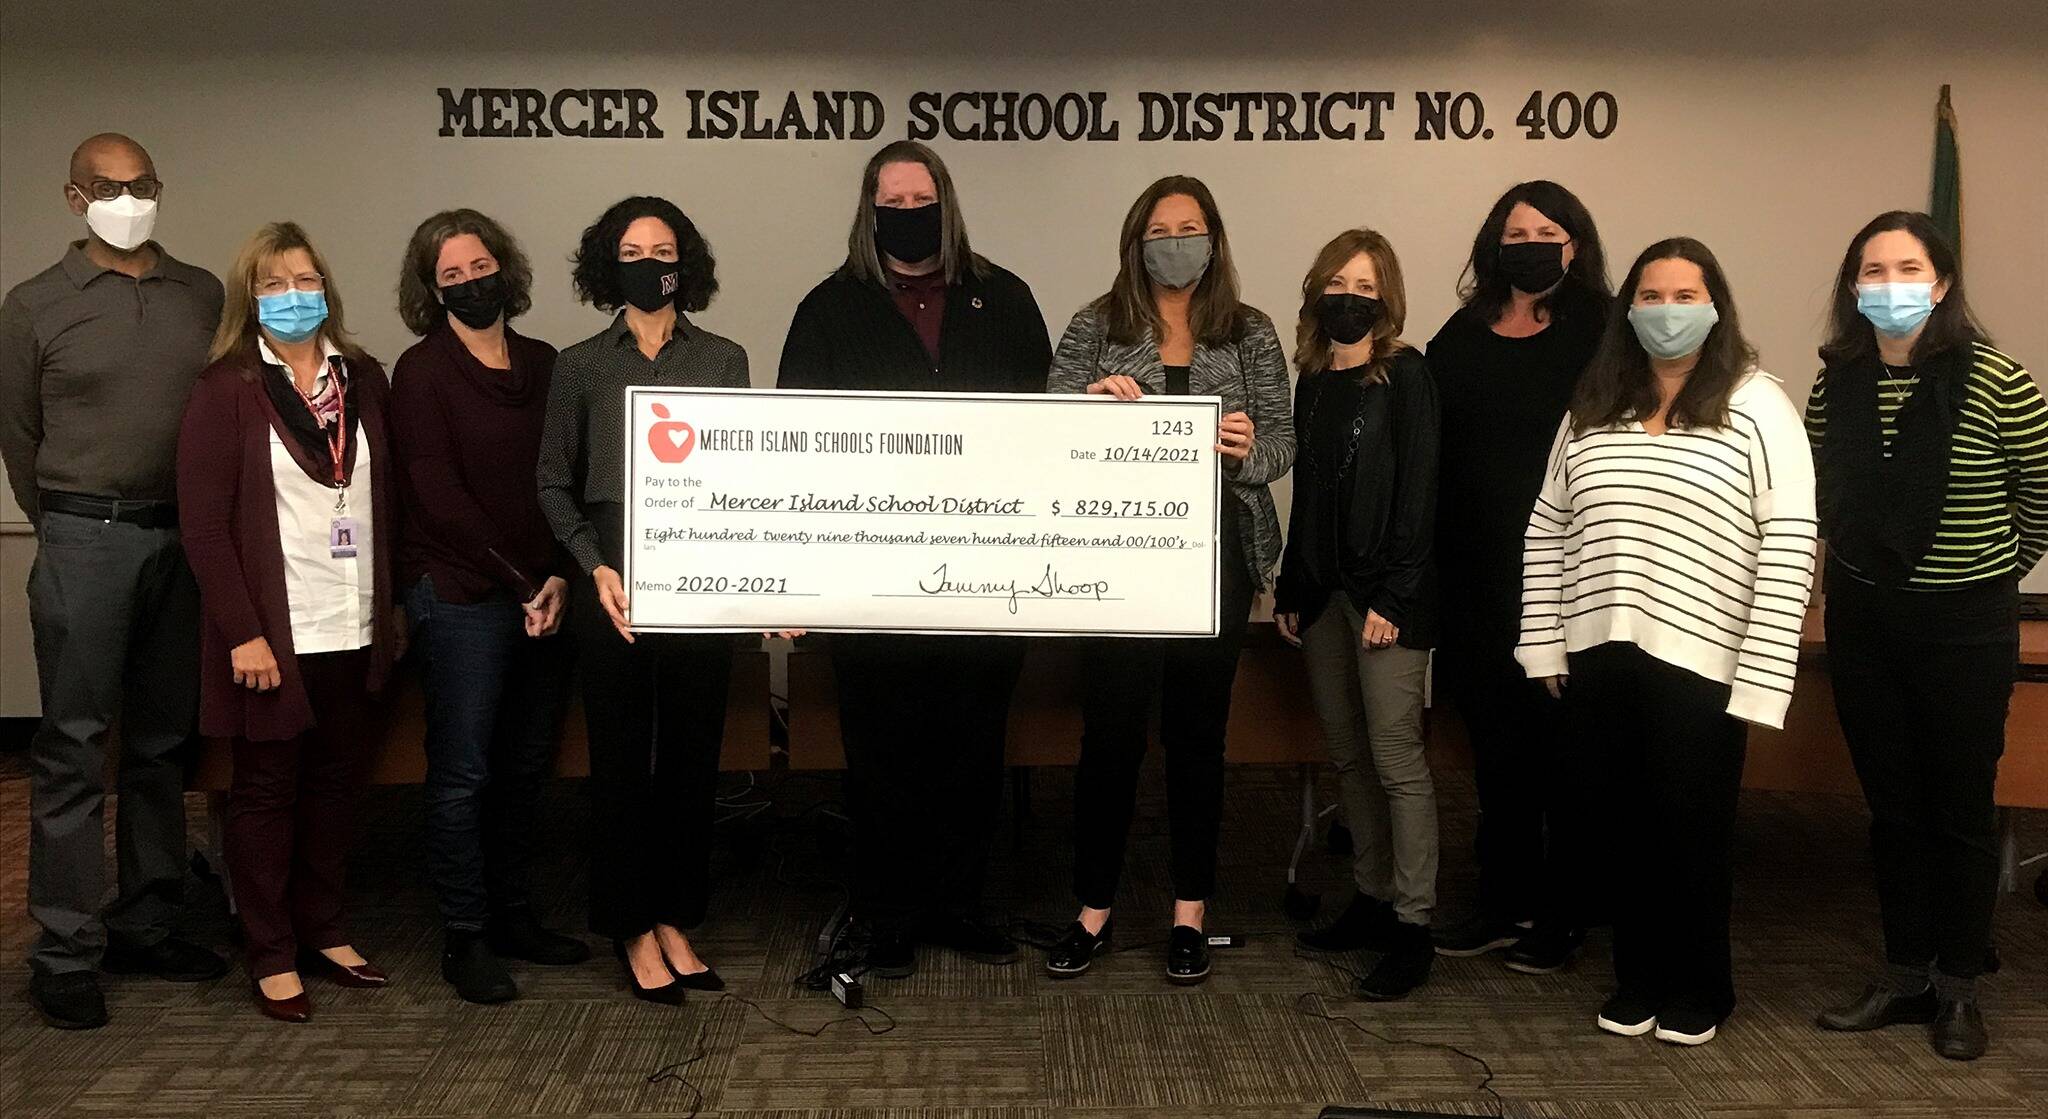 The Mercer Island Schools Foundation recently presented a donation of $829,715 to the Mercer Island School District at a school board meeting. This gift represents the proceeds from the 2020-21 fall and spring campaigns and will benefit programs serving students across the district. Photo courtesy of the Mercer Island School District